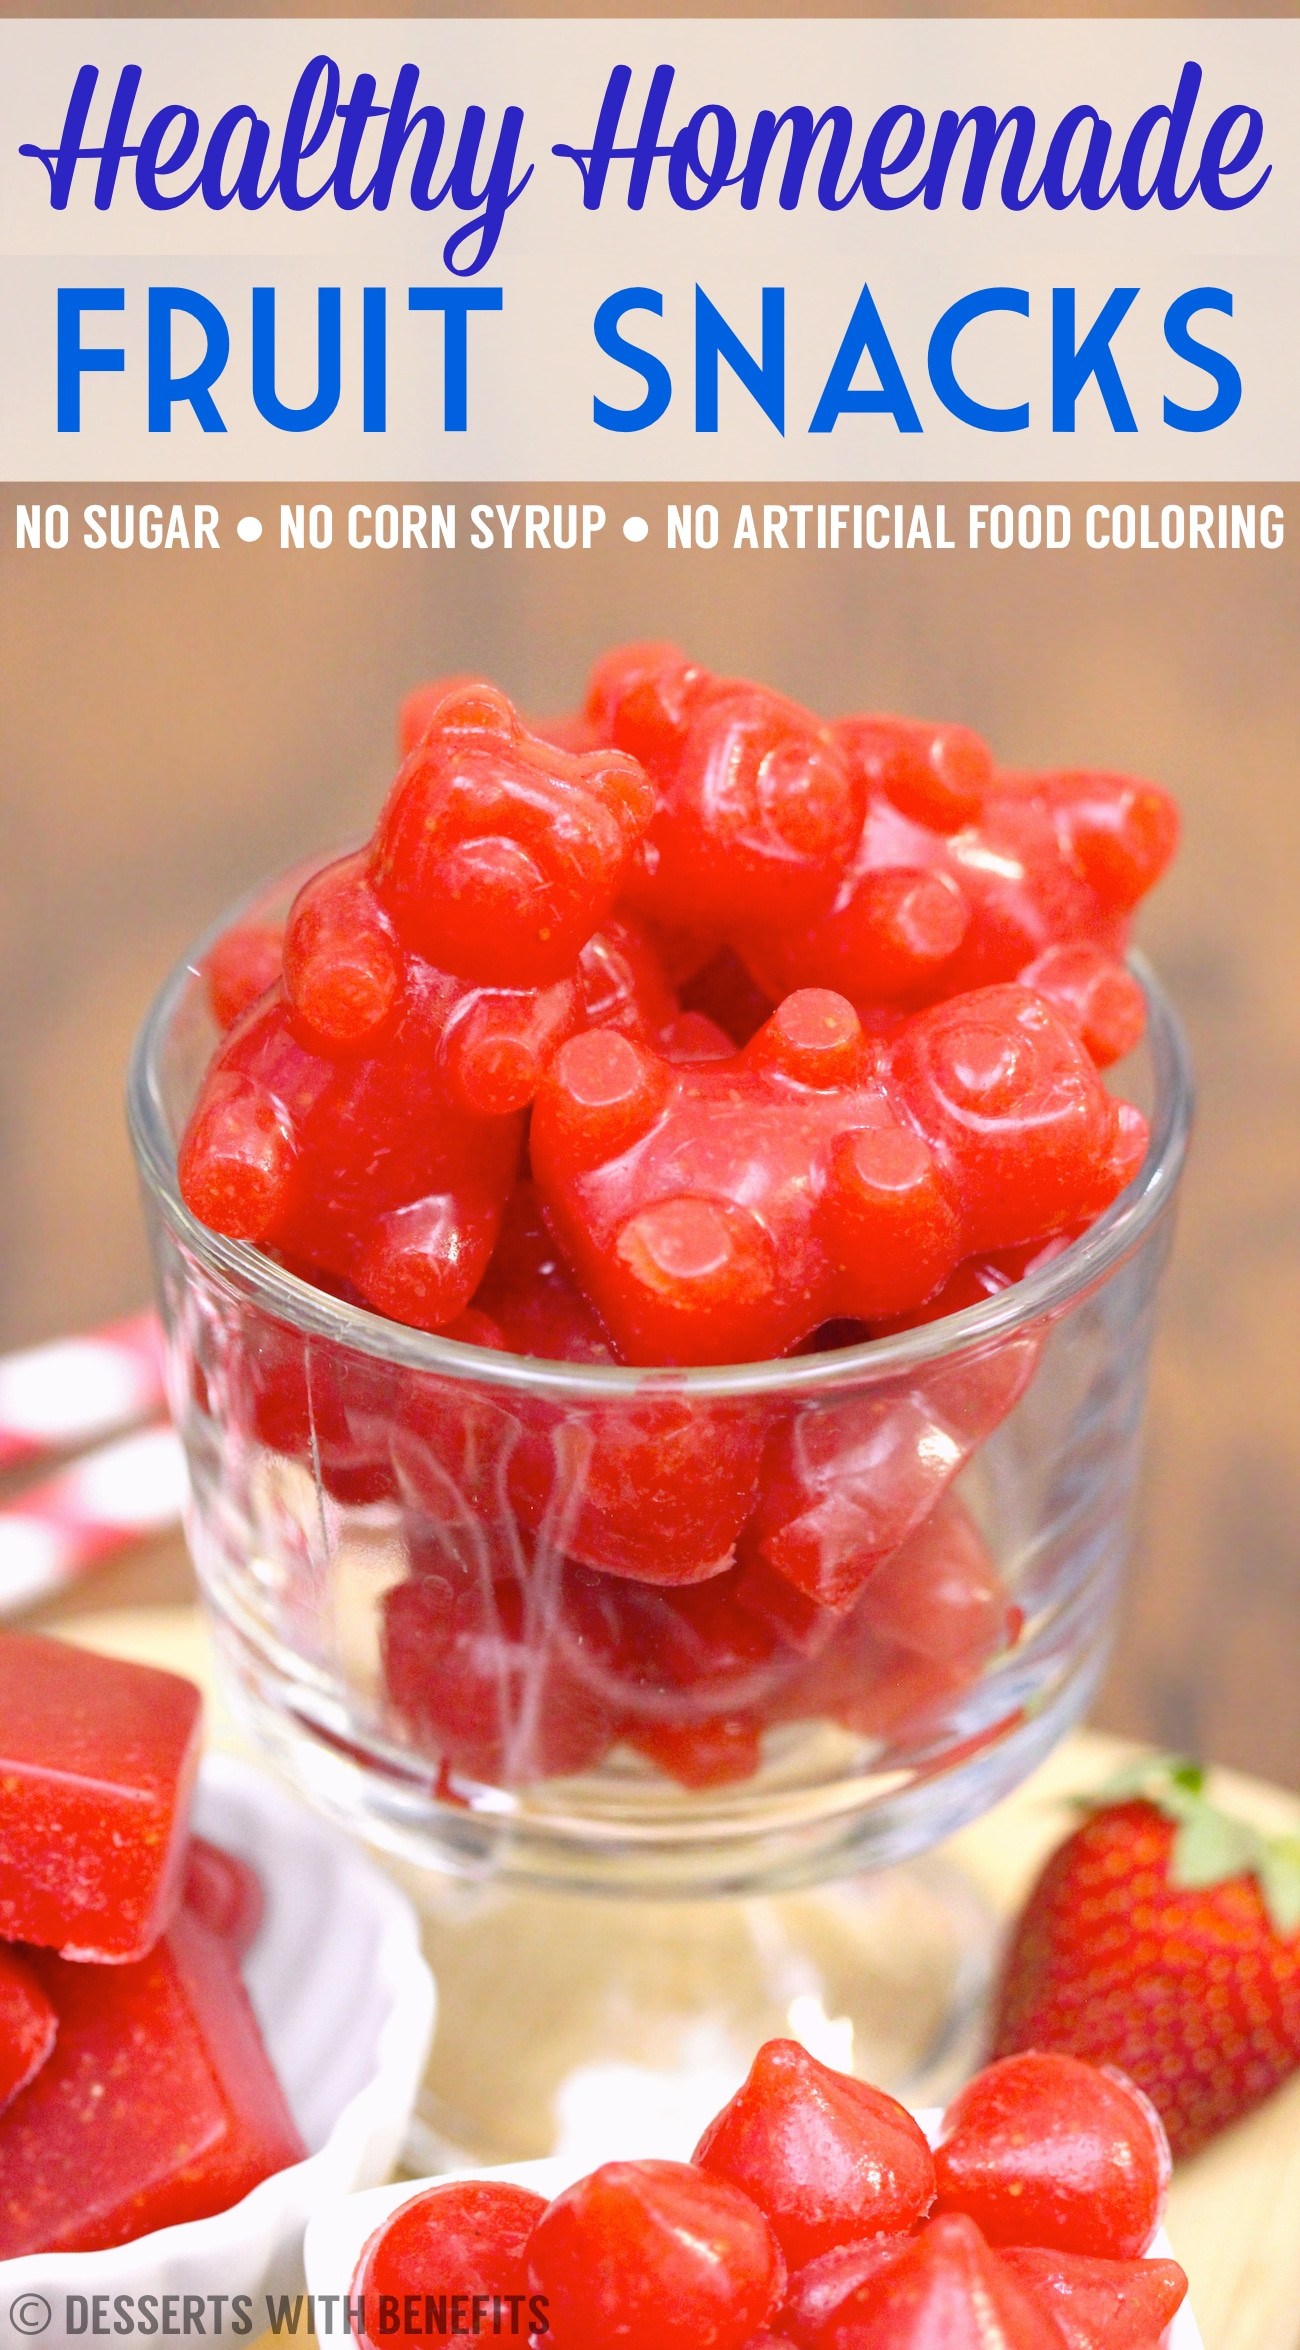 Healthy Fruit Snacks
 Healthy Homemade Fruit Snacks Desserts with Benefits